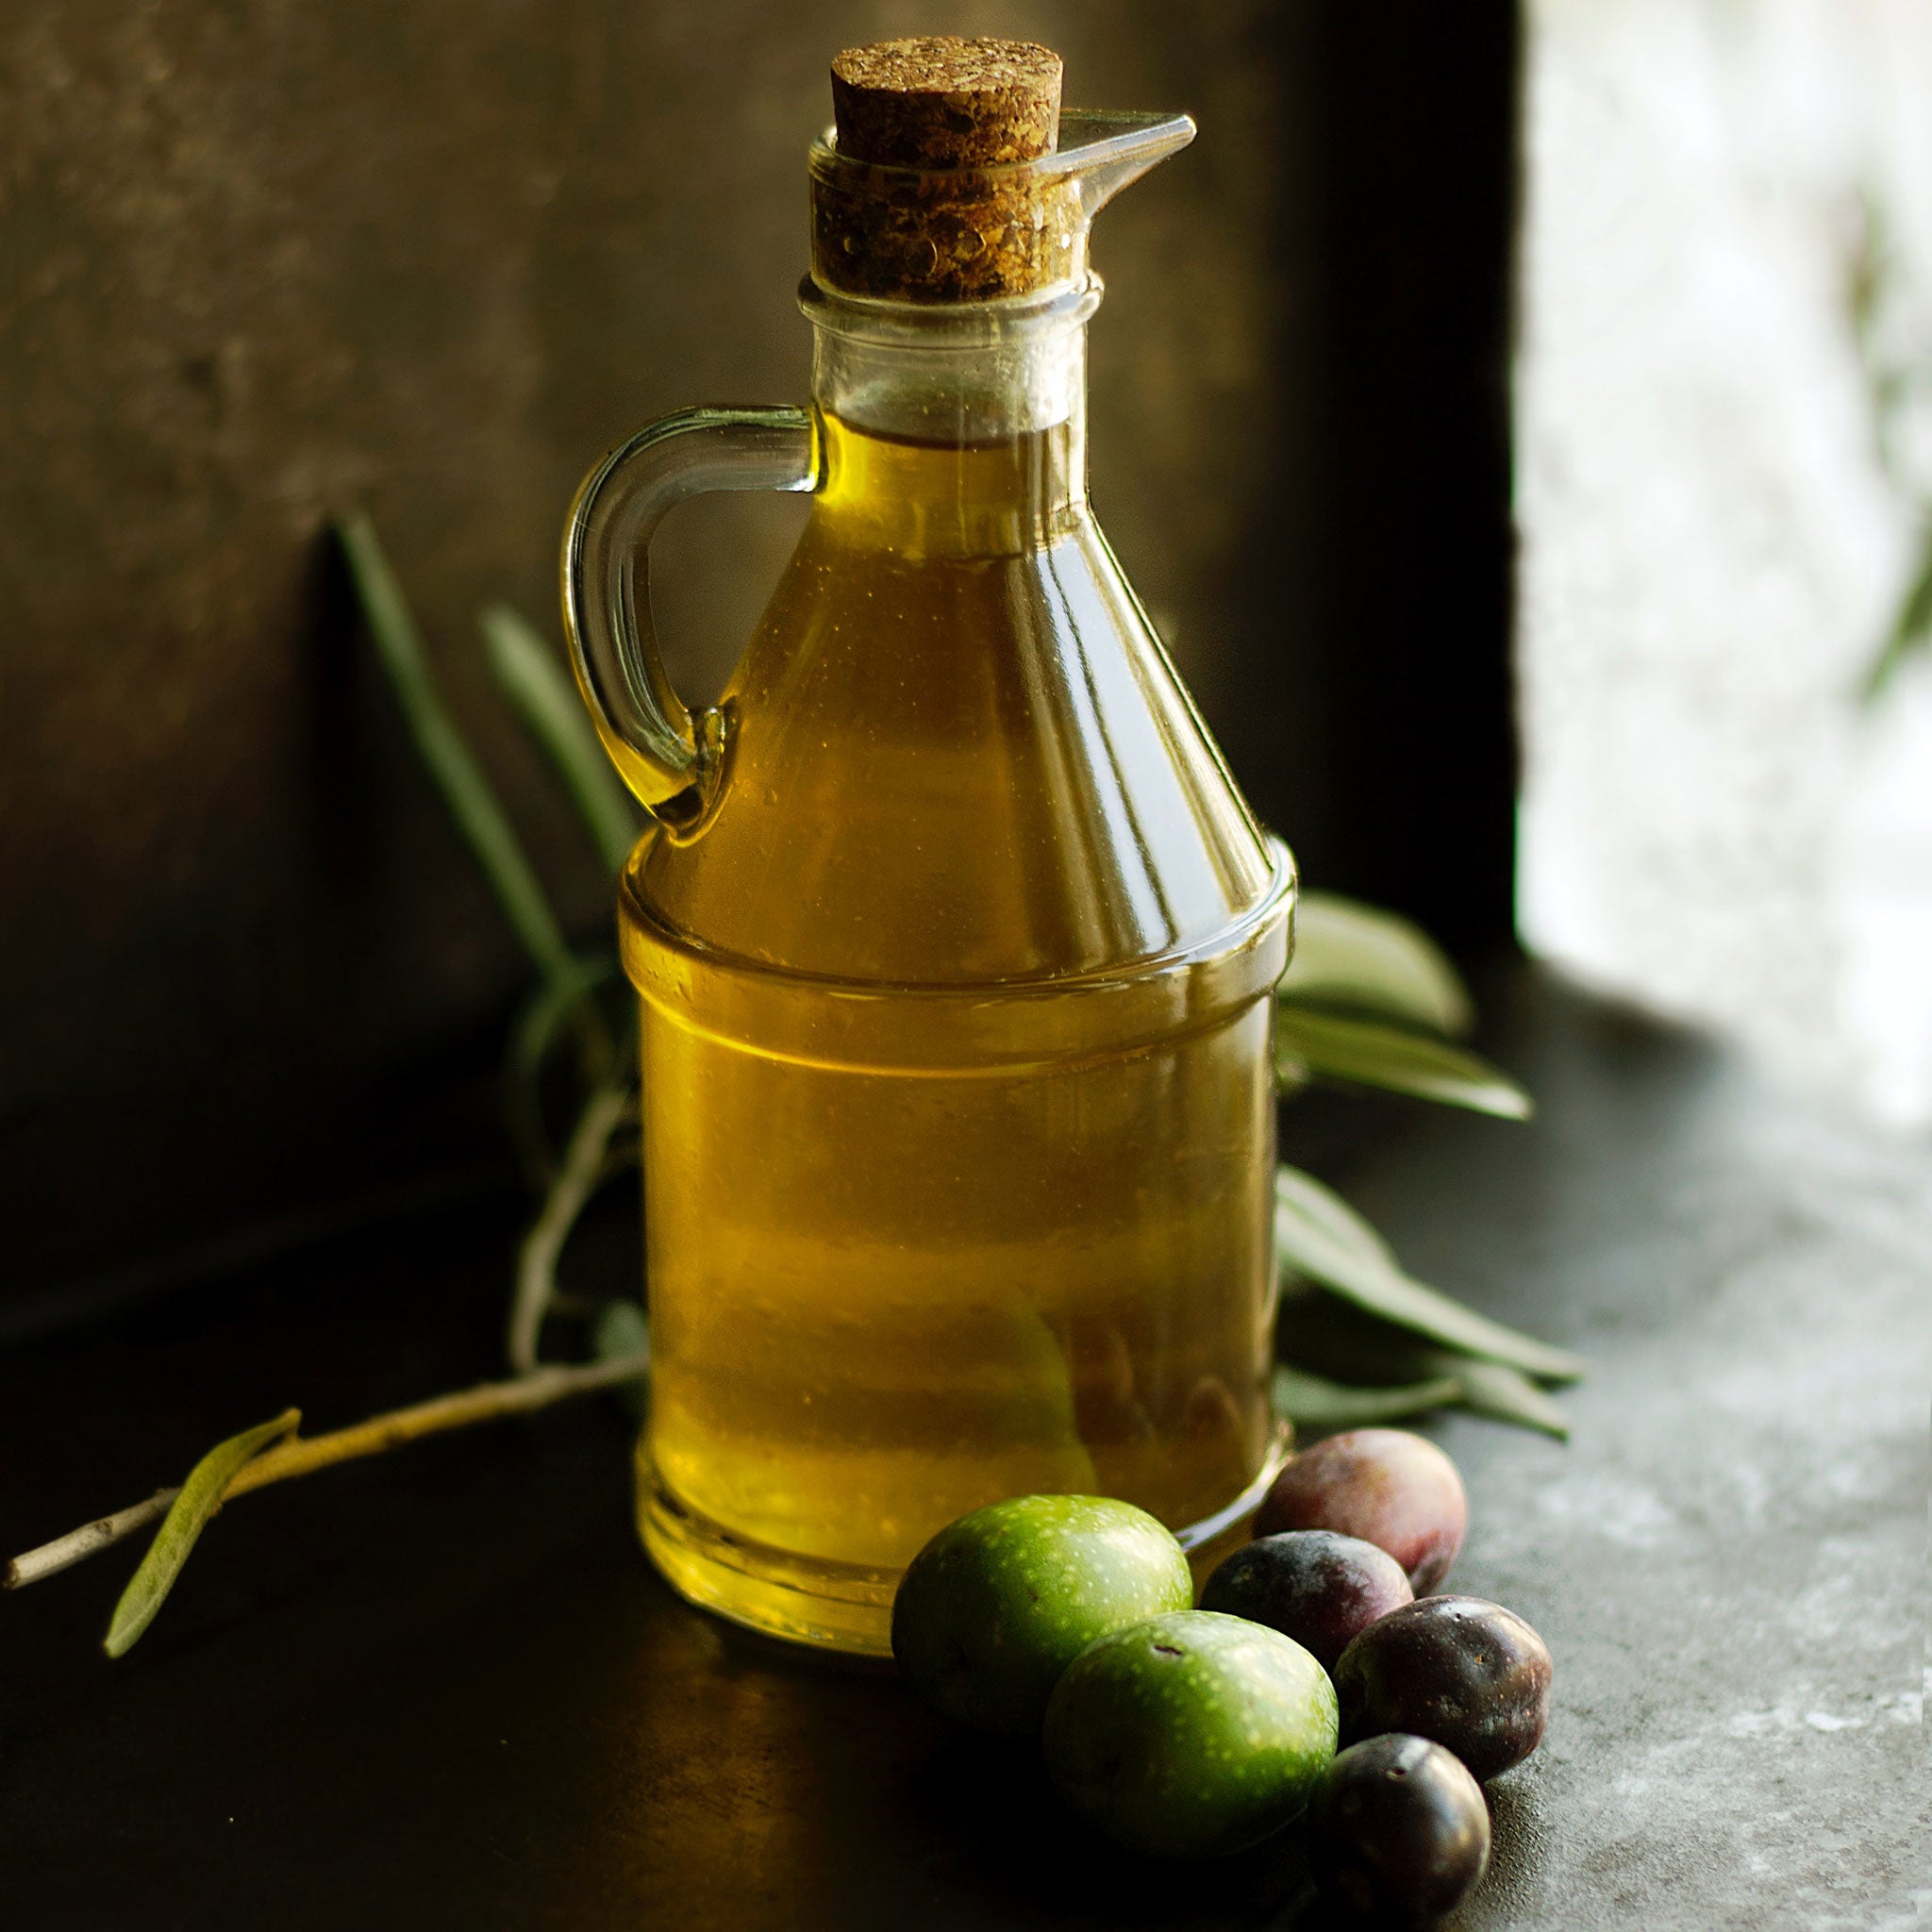 Picual Extra Virgin Olive Oil from Spain